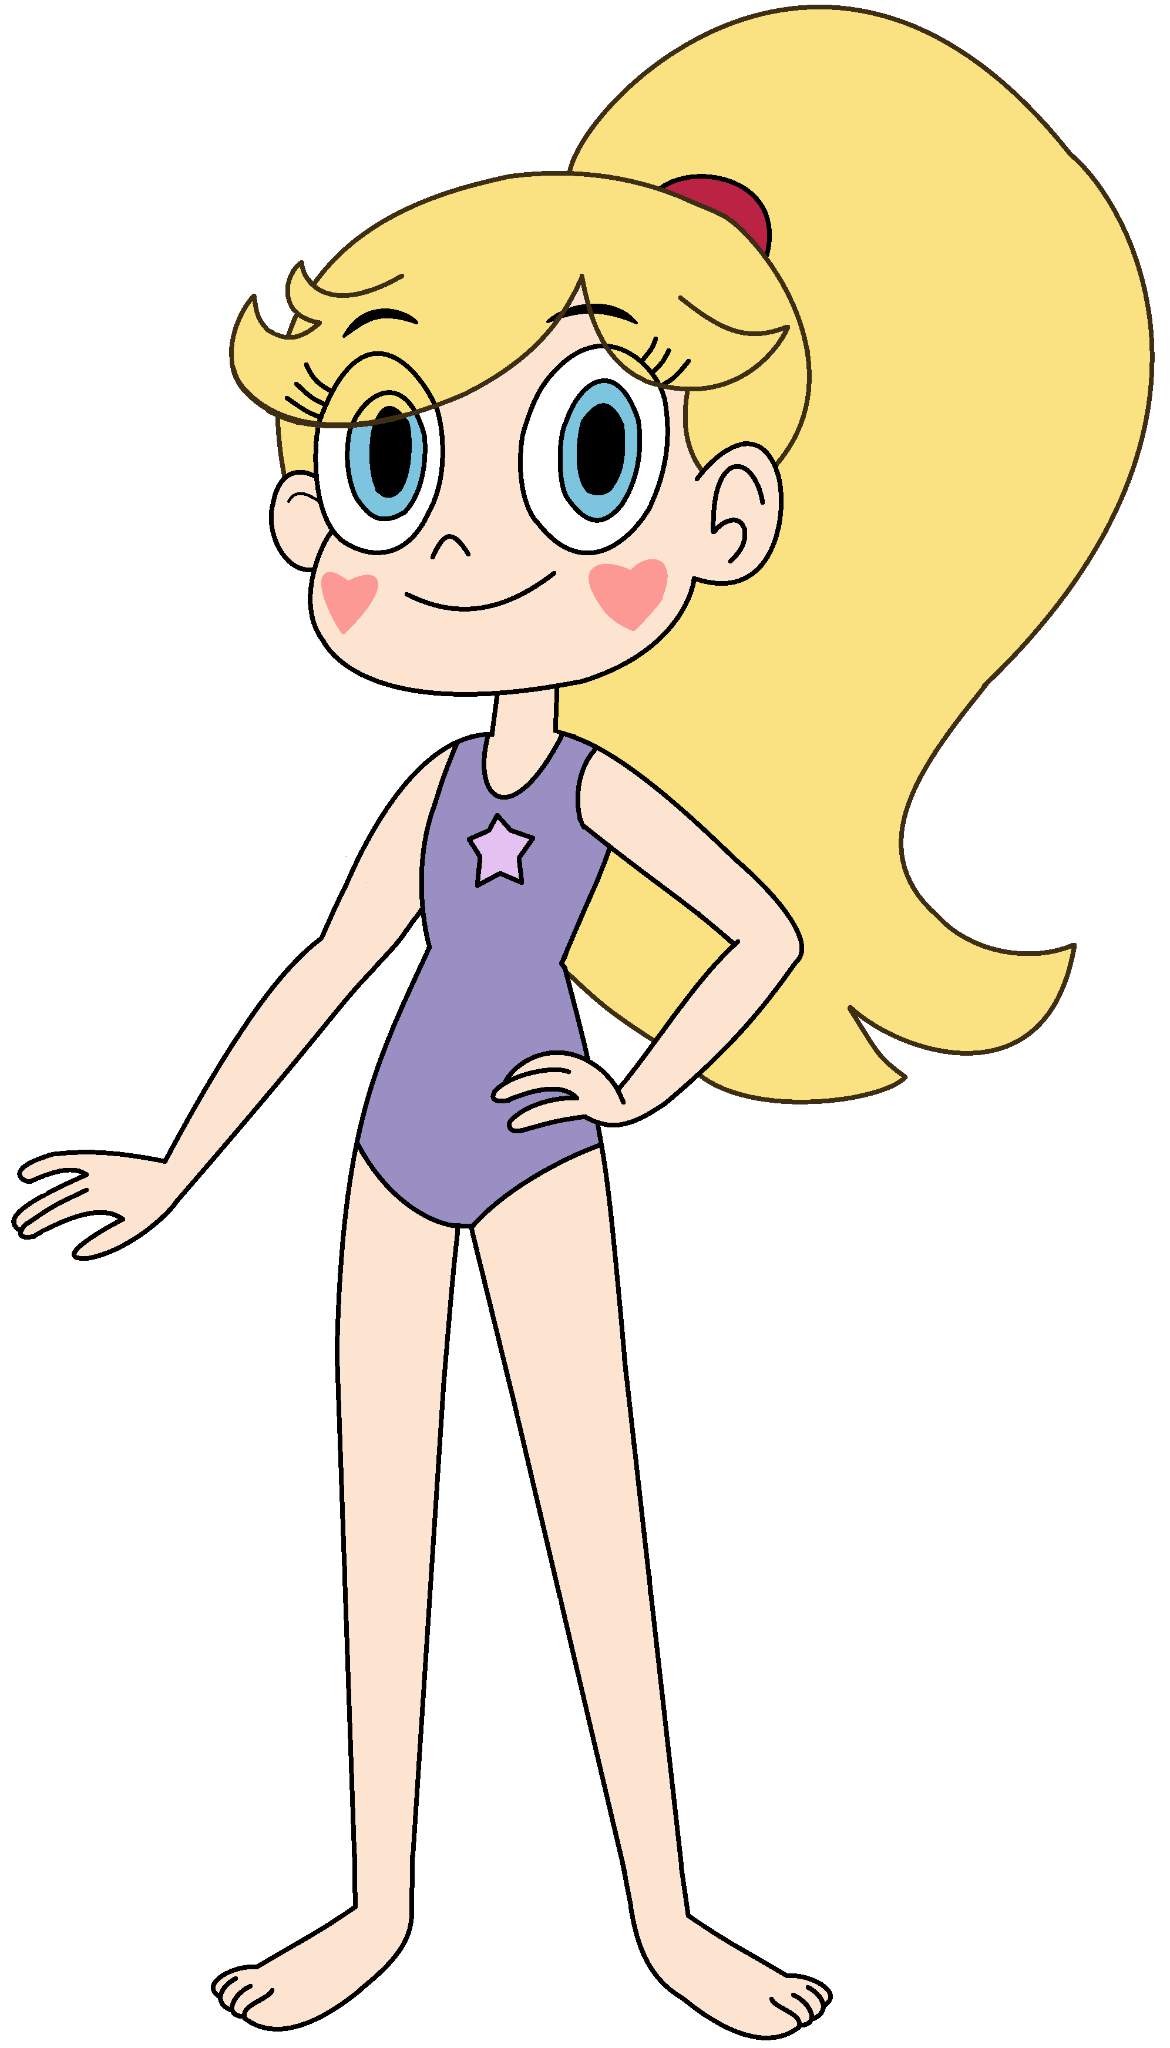 Star Butterfly Wears A Cute Swimsuit Svtfoe Amino Hot Sex Picture